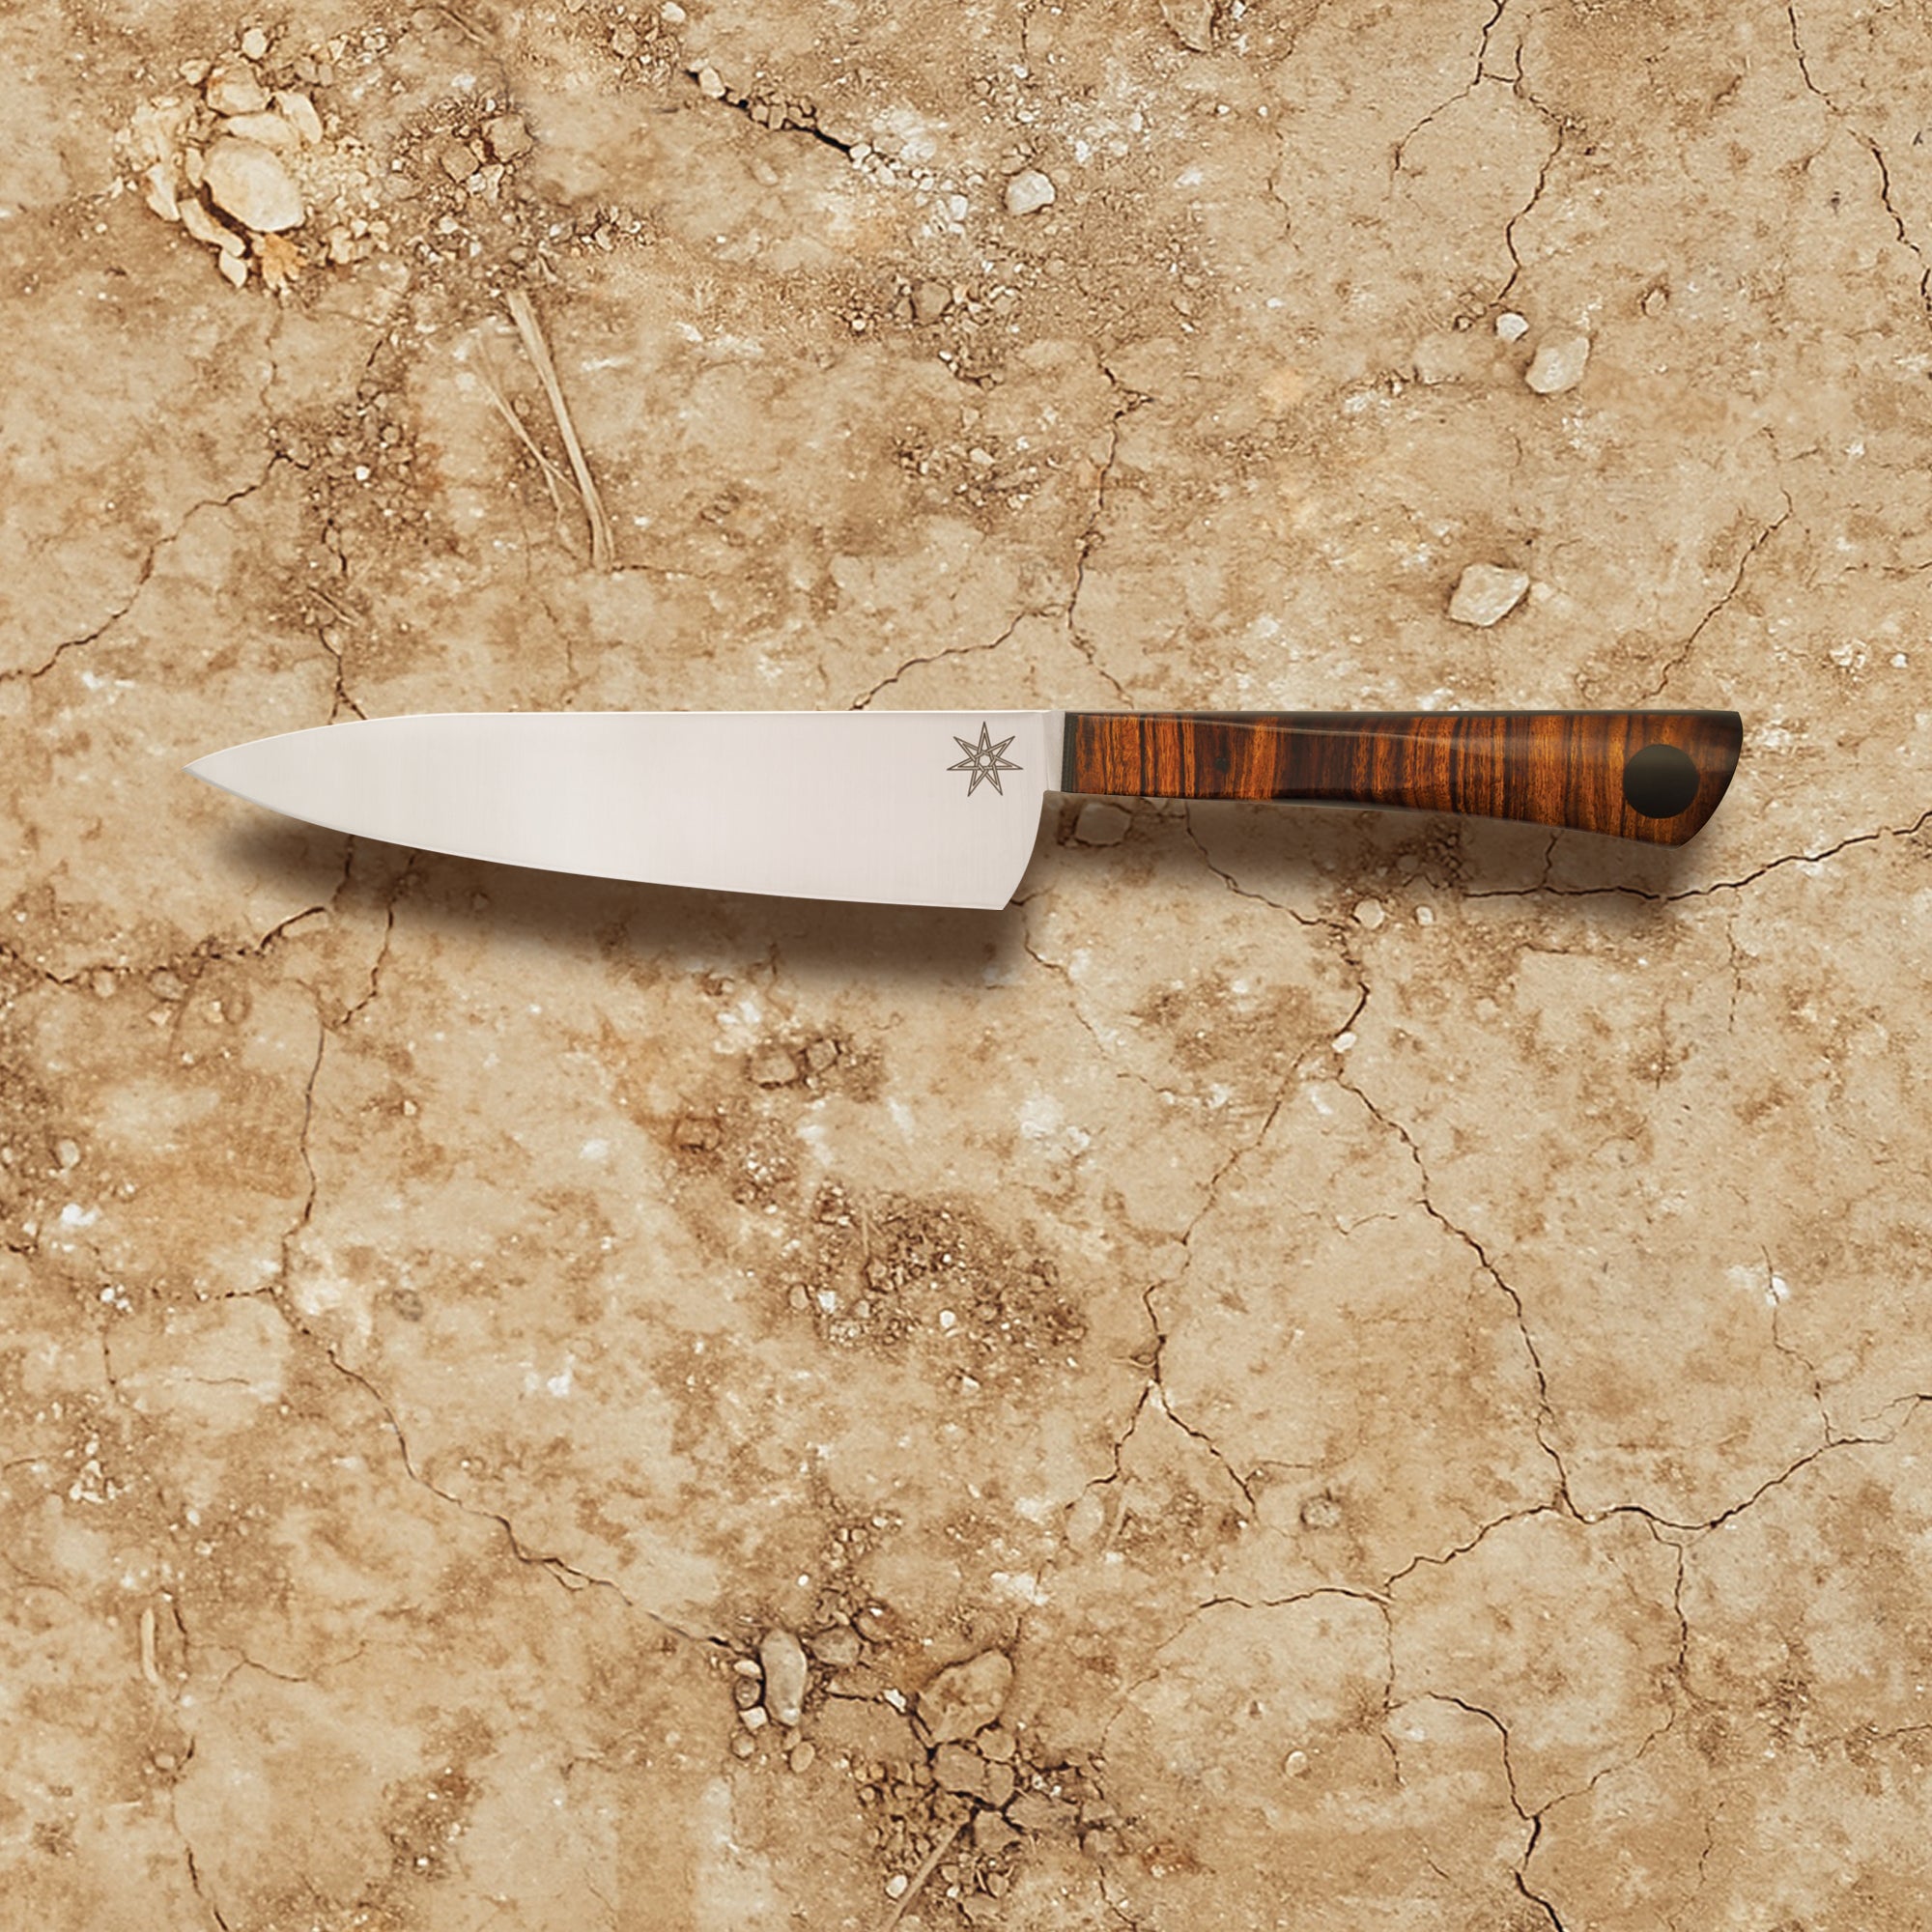 Kitchen knife with wood handle made from desert ironwood and stainless steel blades.